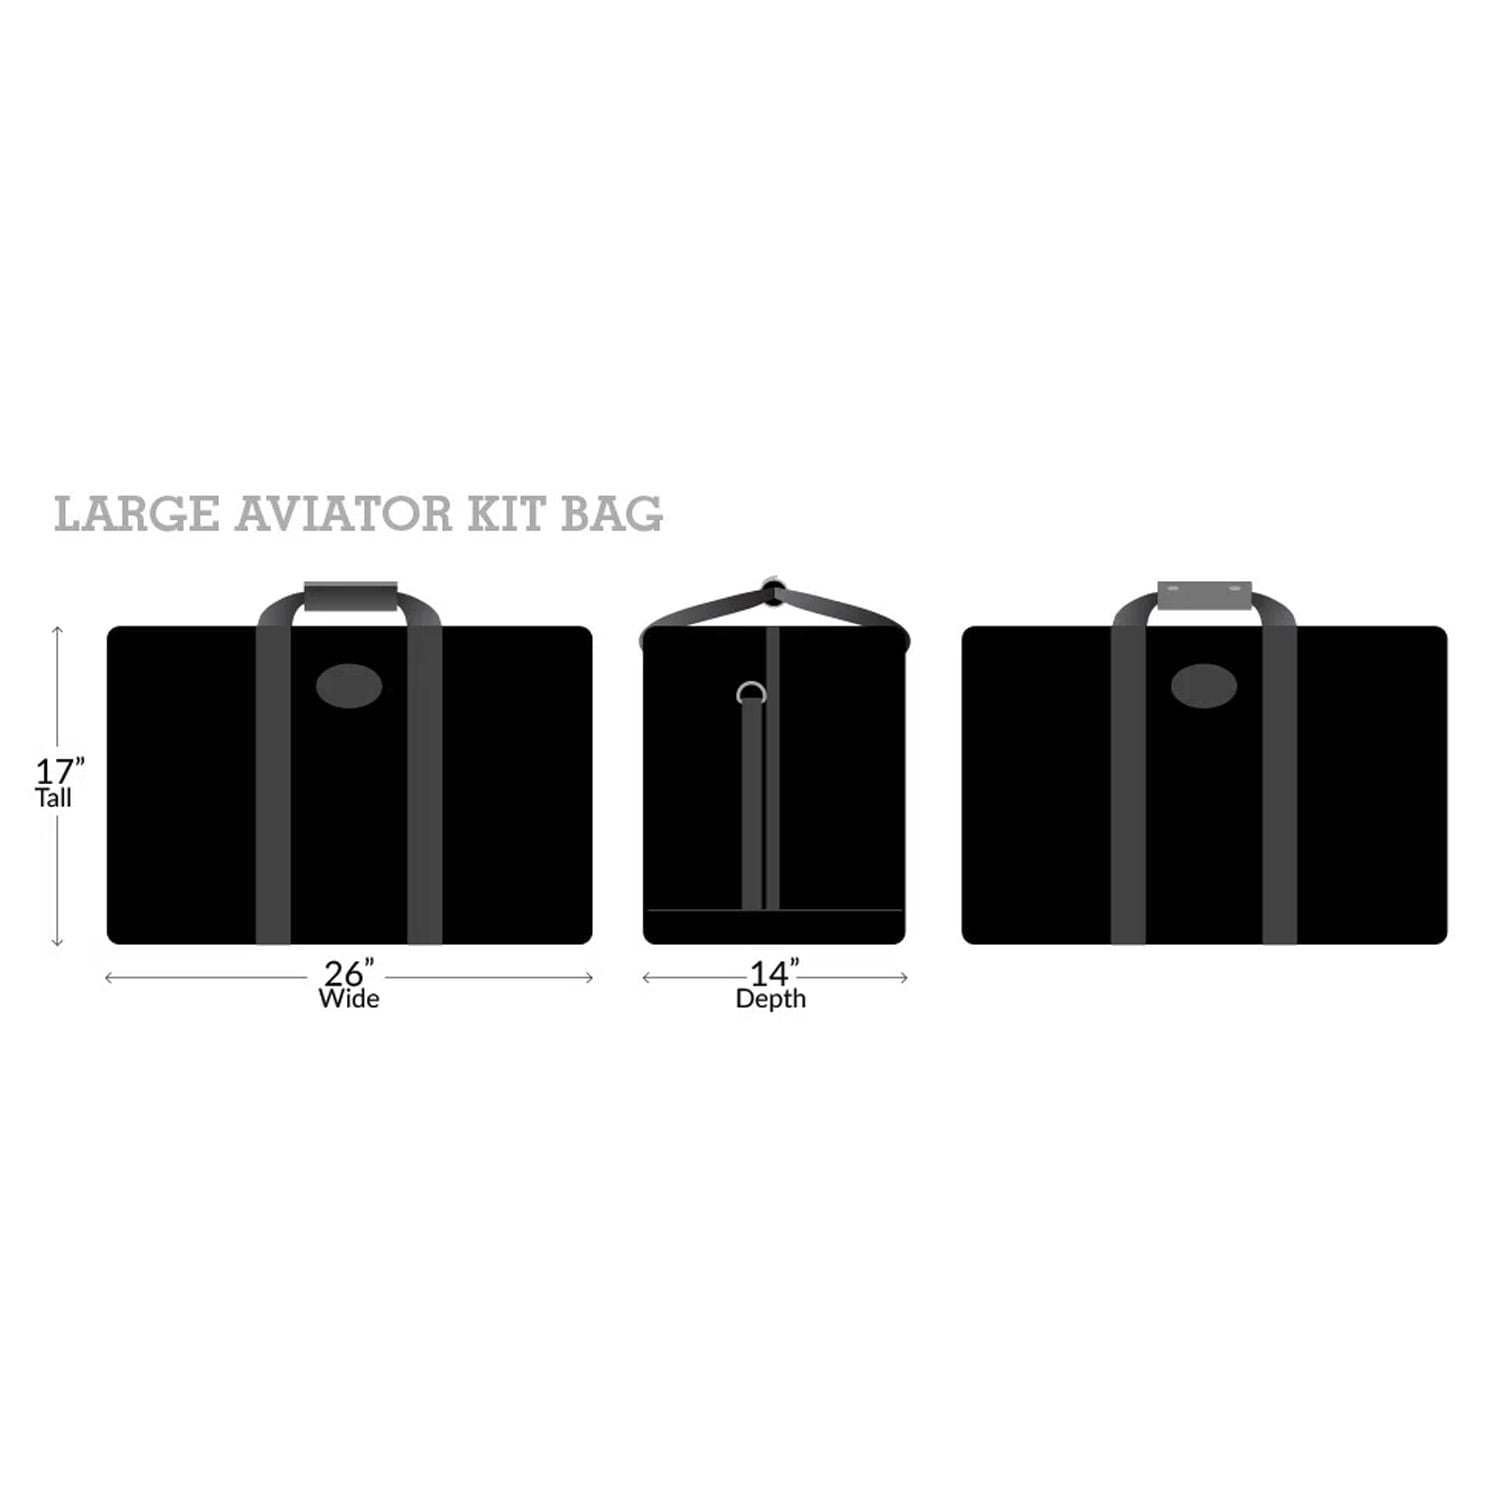 Large Aviator Kit Bag measurements 17 inches tall x 26 inches Wide x 14 inches Depth